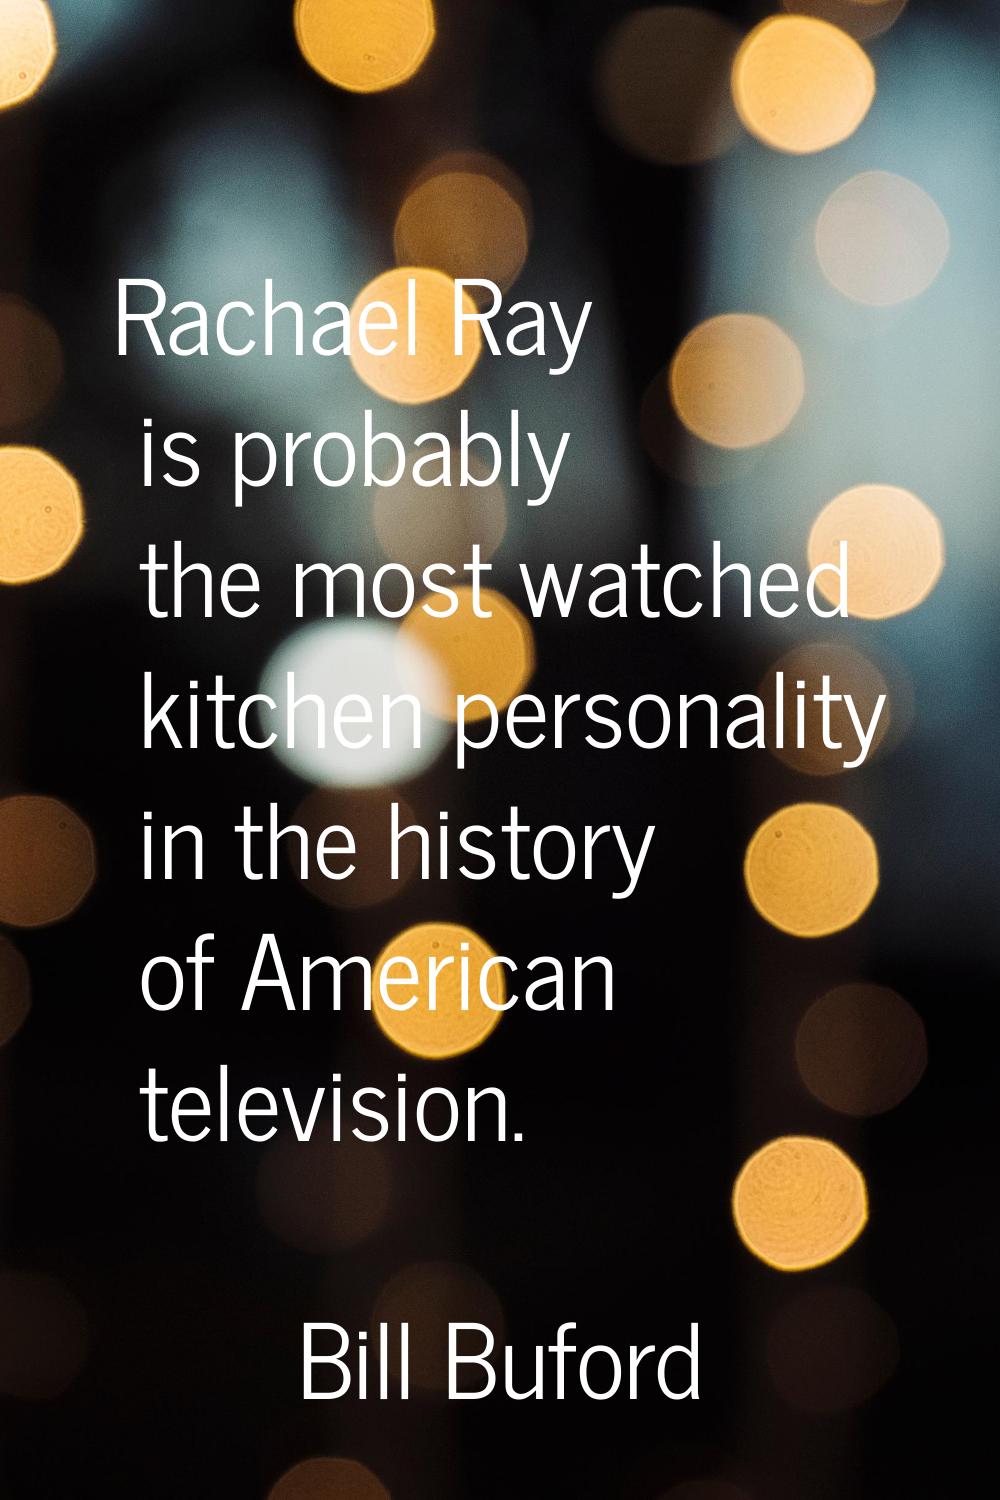 Rachael Ray is probably the most watched kitchen personality in the history of American television.